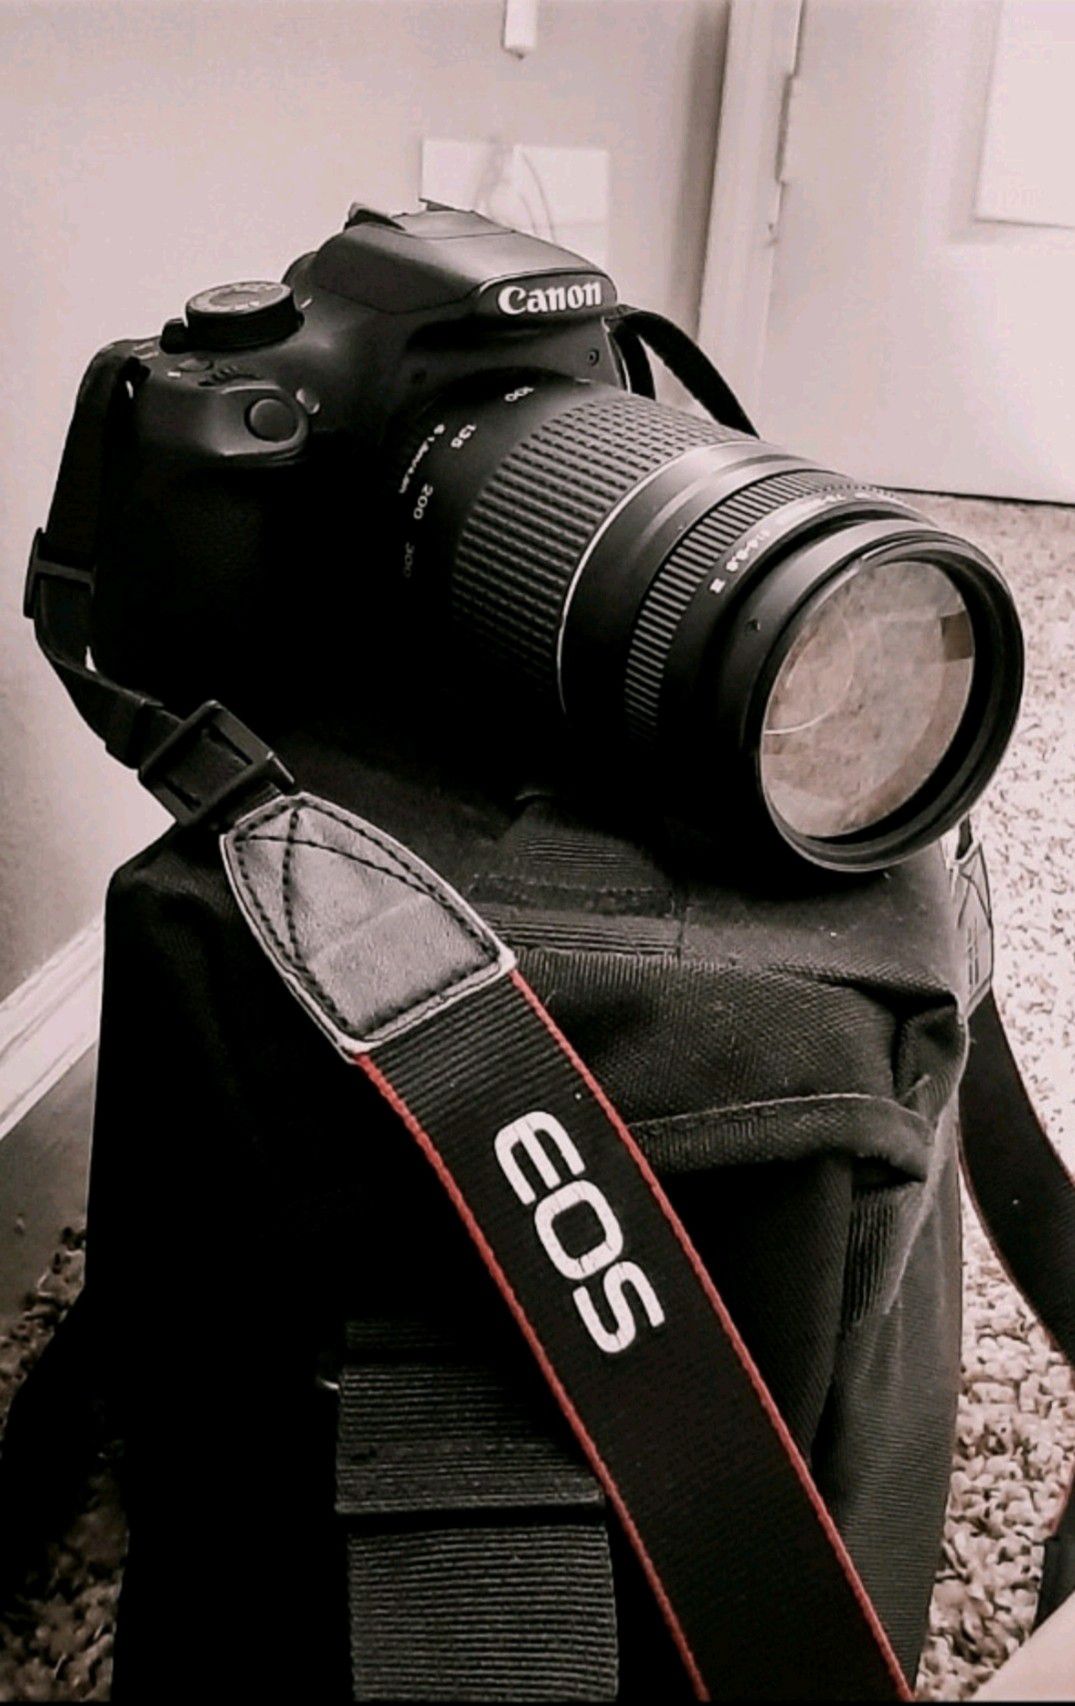 Canon Rebel T5 with 75-300mm lens